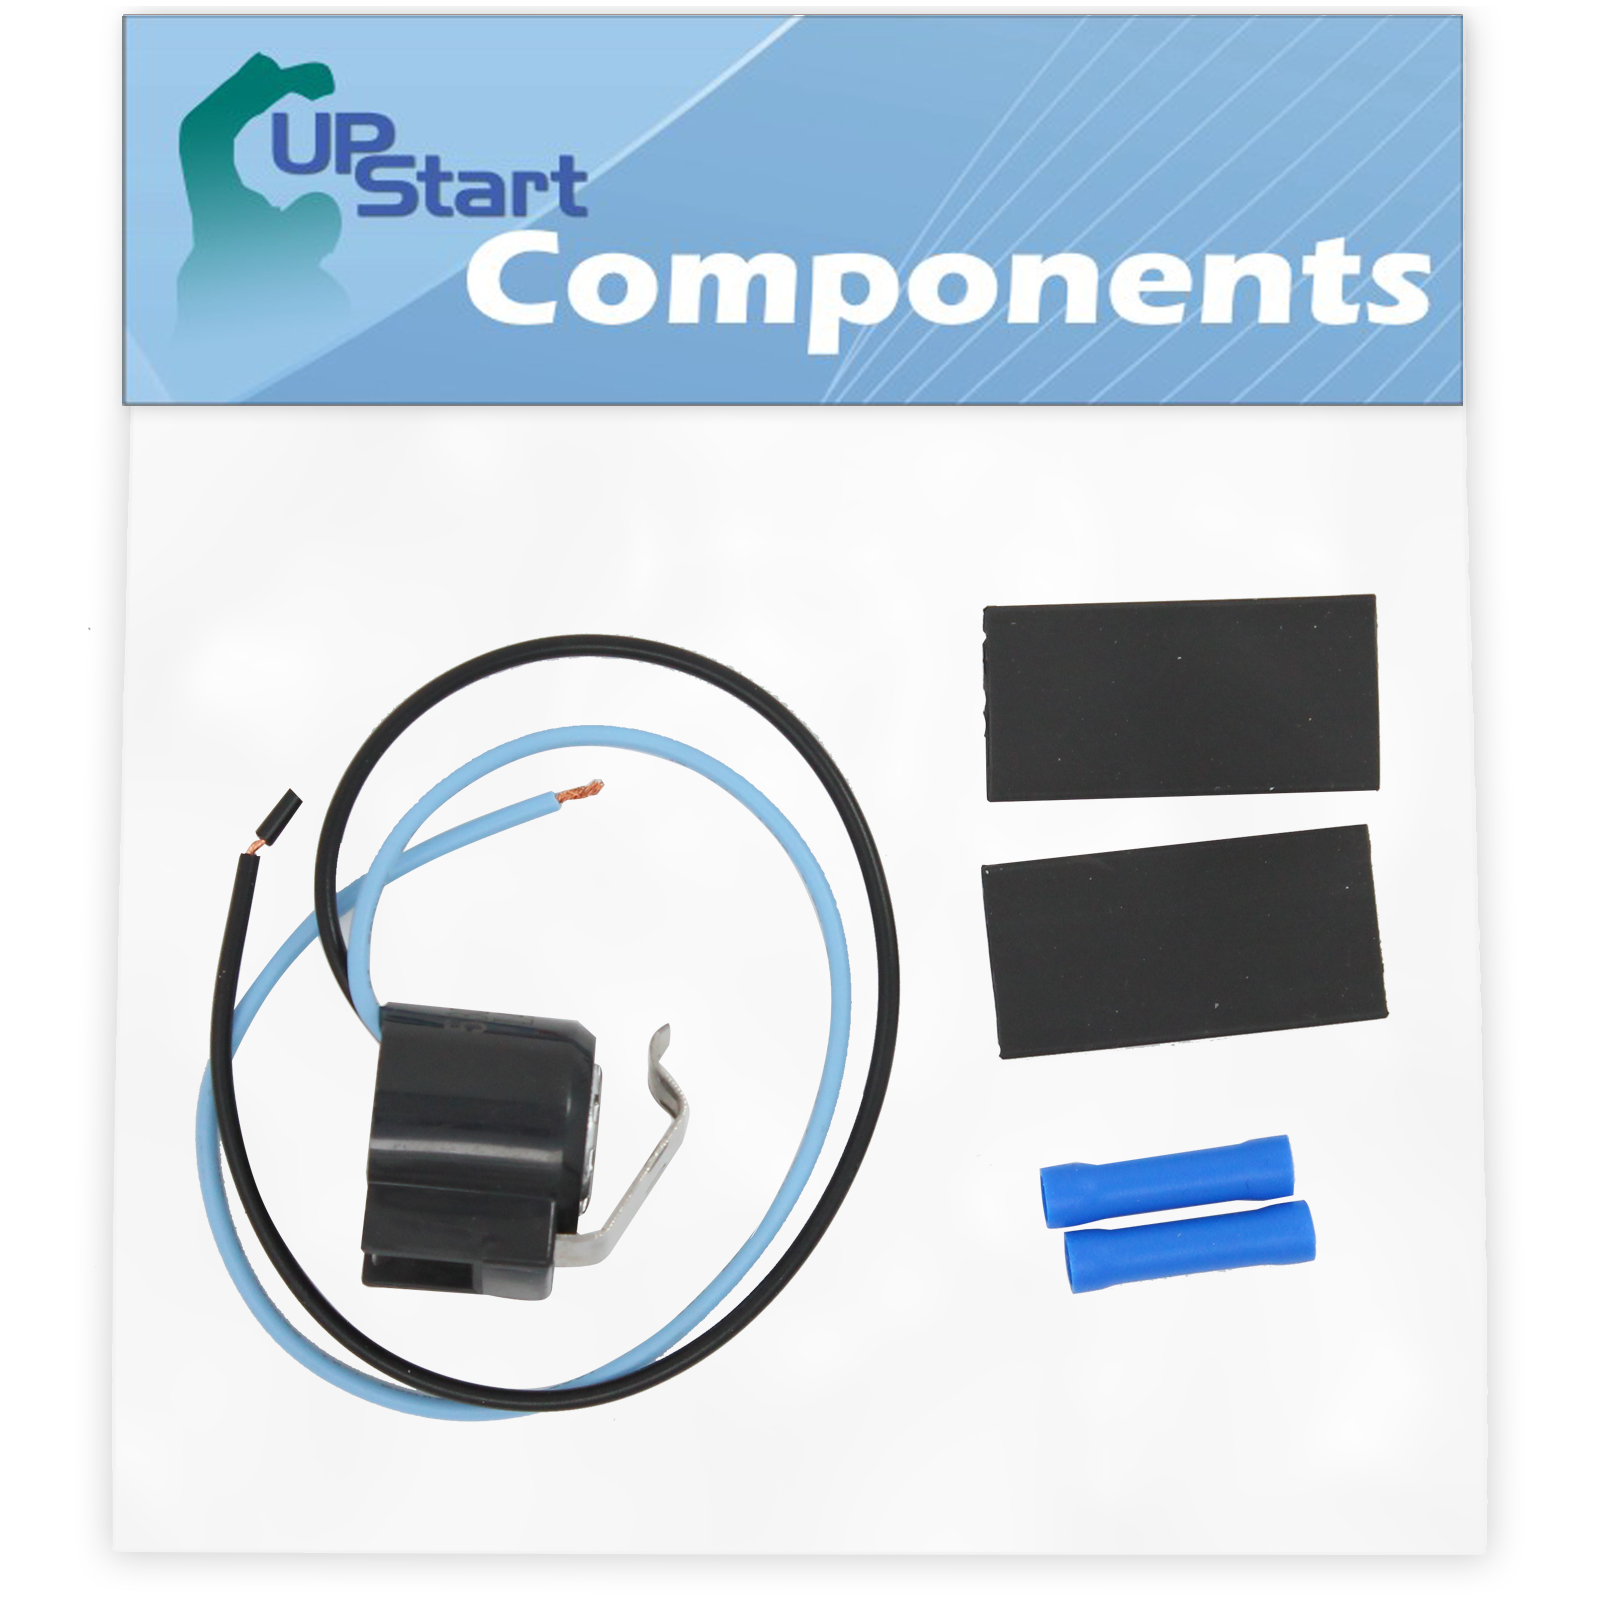 5303918214 Defrost Thermostat Replacement for Frigidaire PLHS269ZCB3 Refrigerator - Compatible with 5303918214 Defrost Thermostat Kit - UpStart Components Brand - image 1 of 2